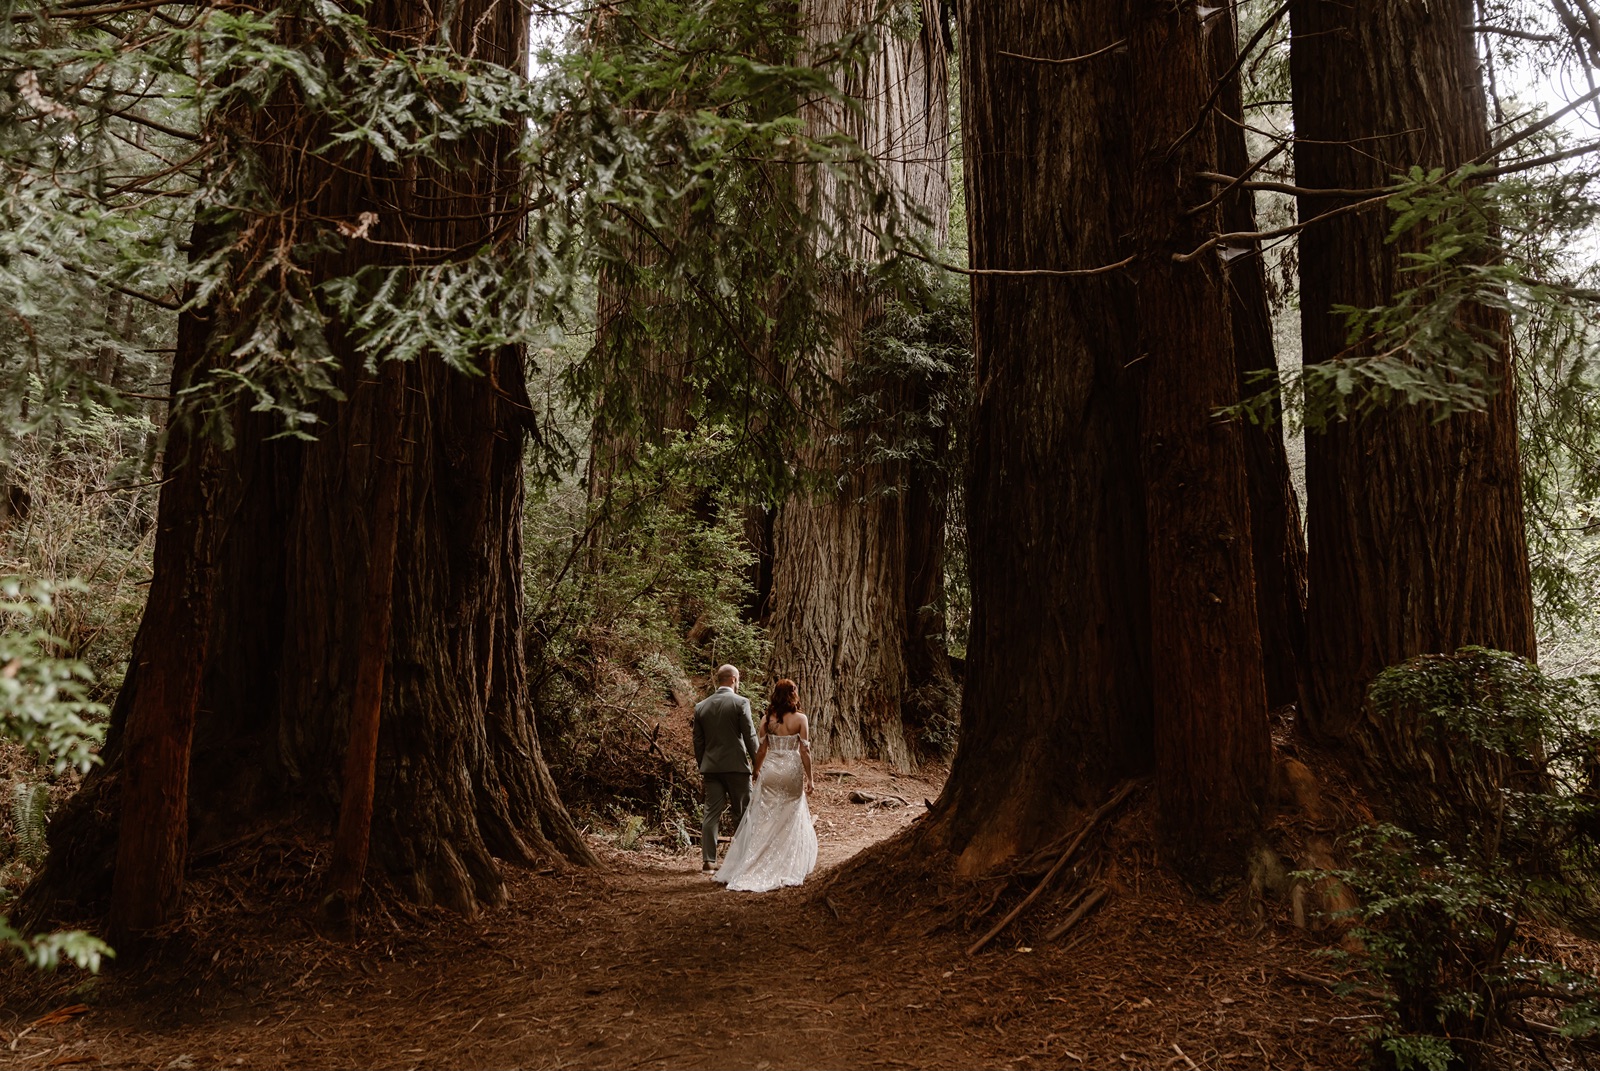 Bride and groom with the Redwood trees in Fern Canyon